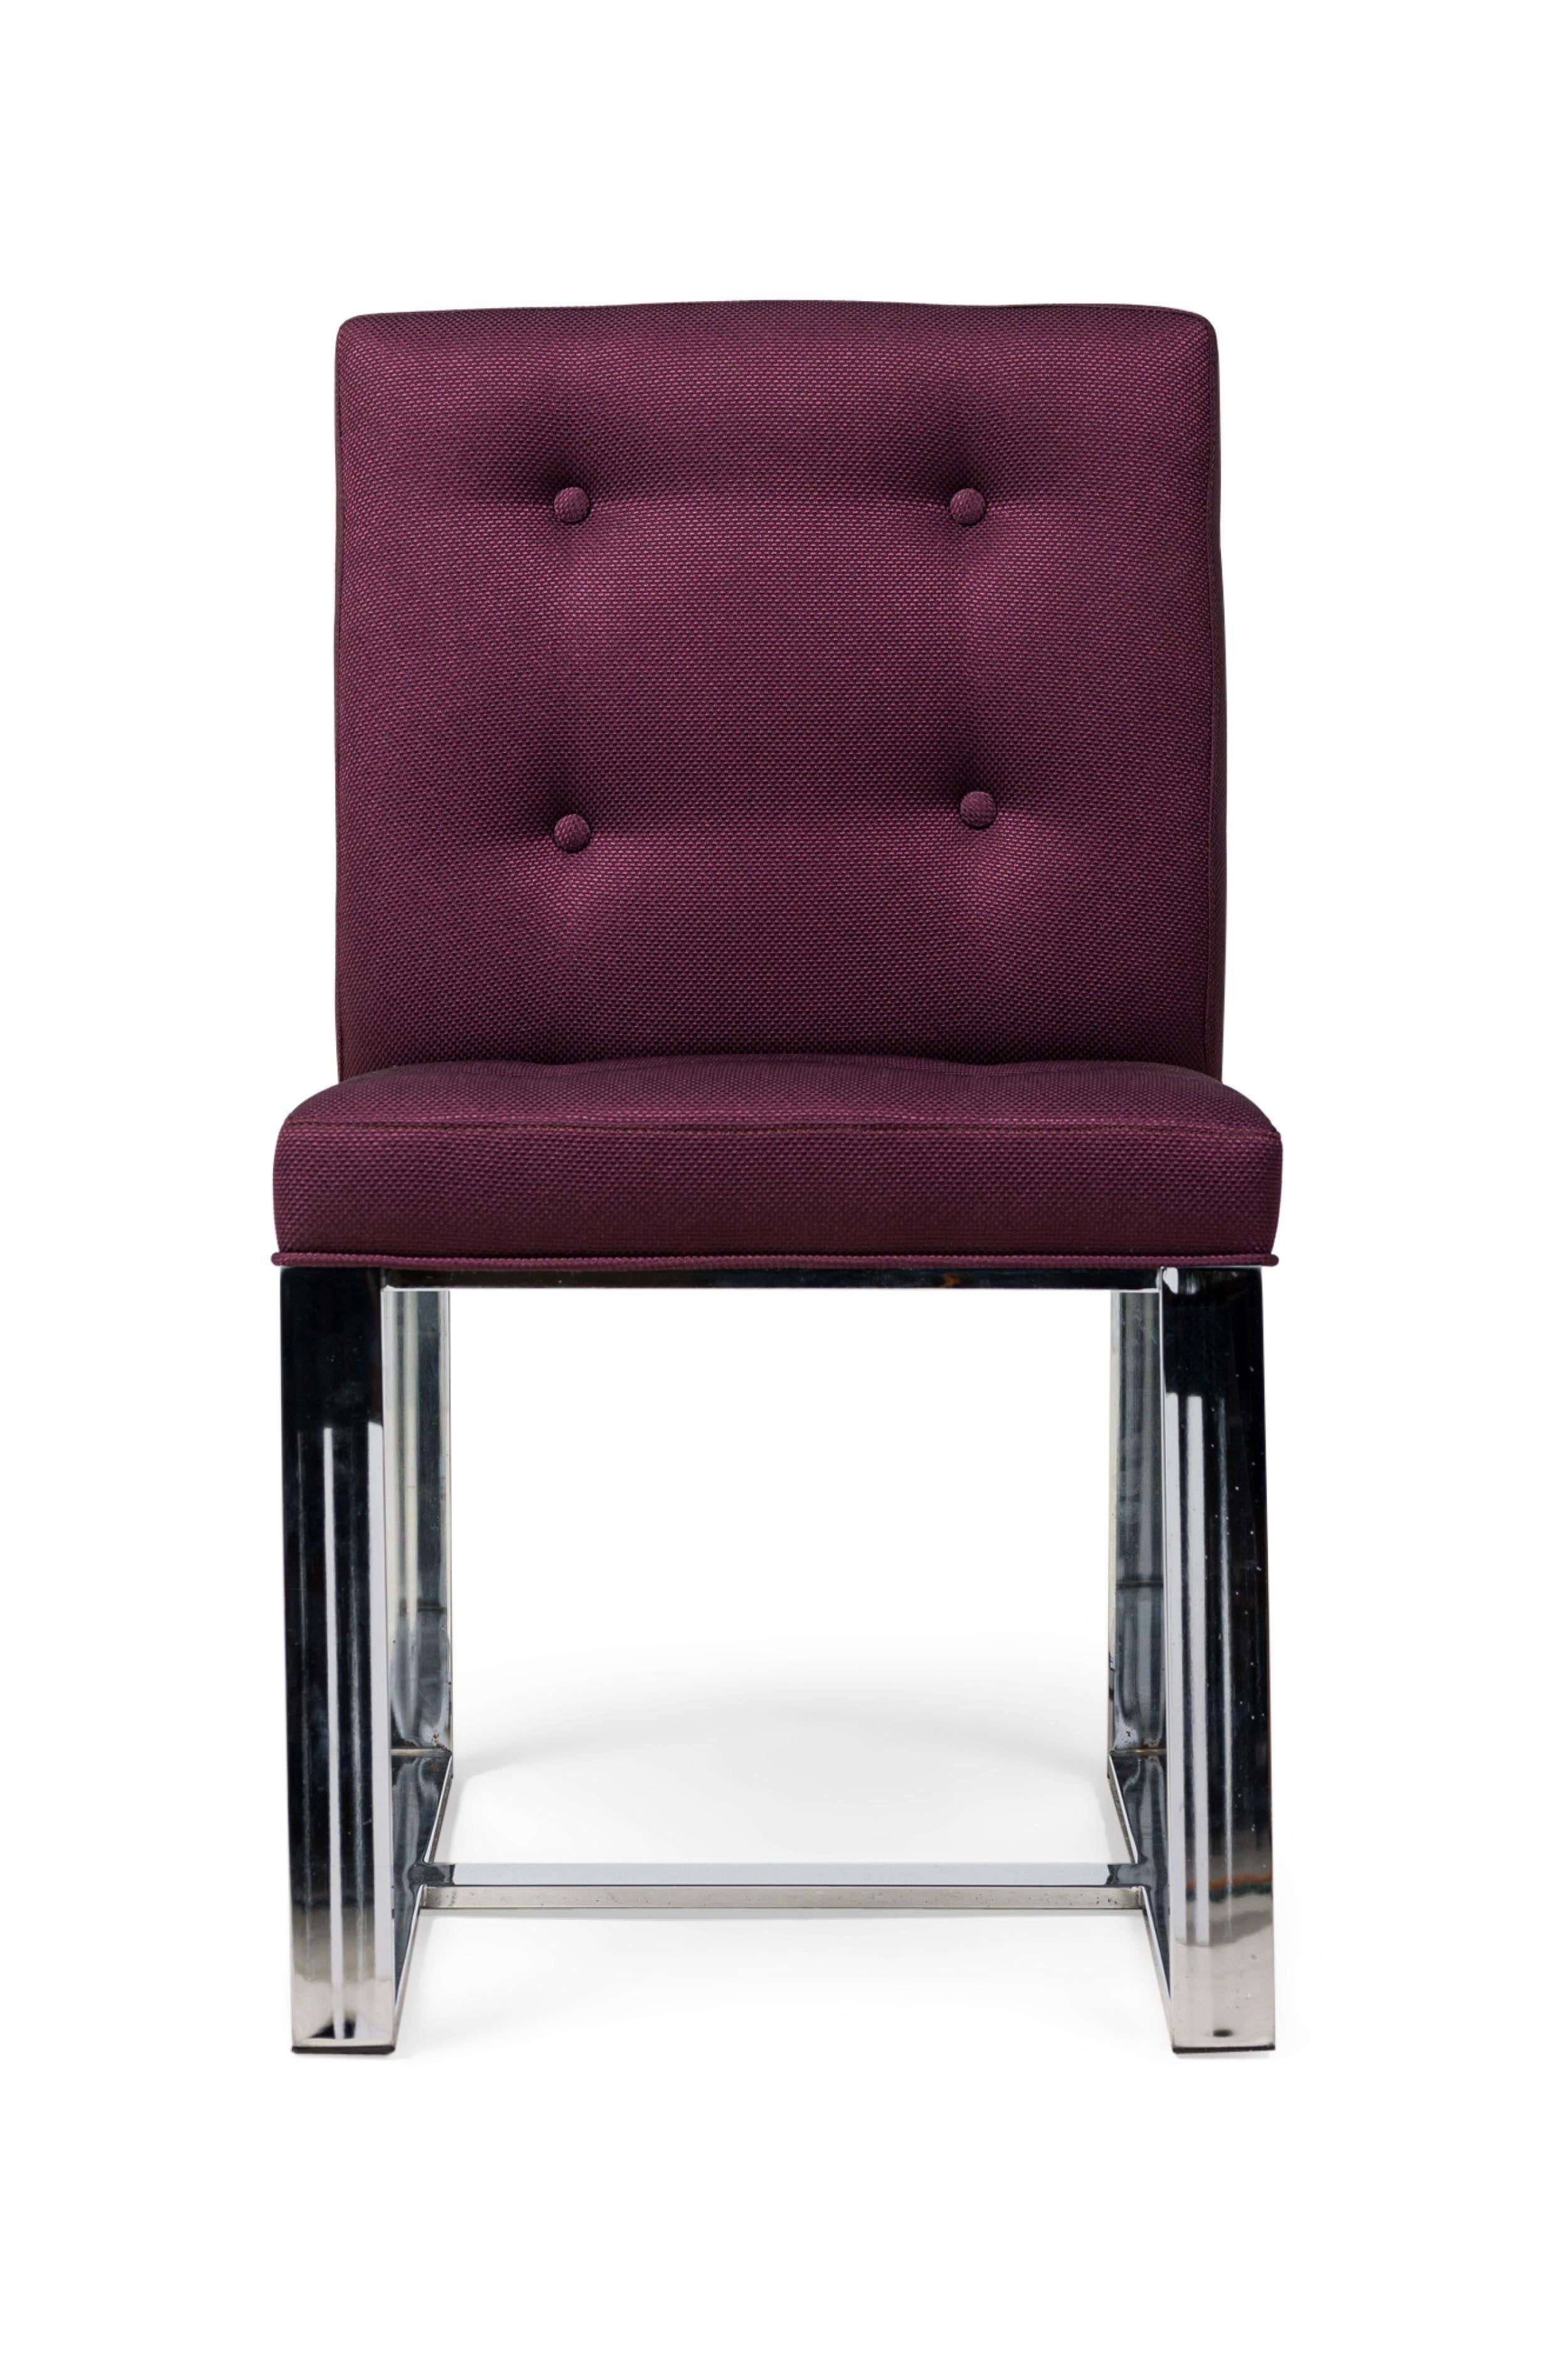 SET of 10 American Mid-Century dining / side chairs with flat bar polished stainless steel frames, upholstered in a textured purple fabric with button tufted backs. (MILO BAUGHMAN) (PRICED AS SET)
